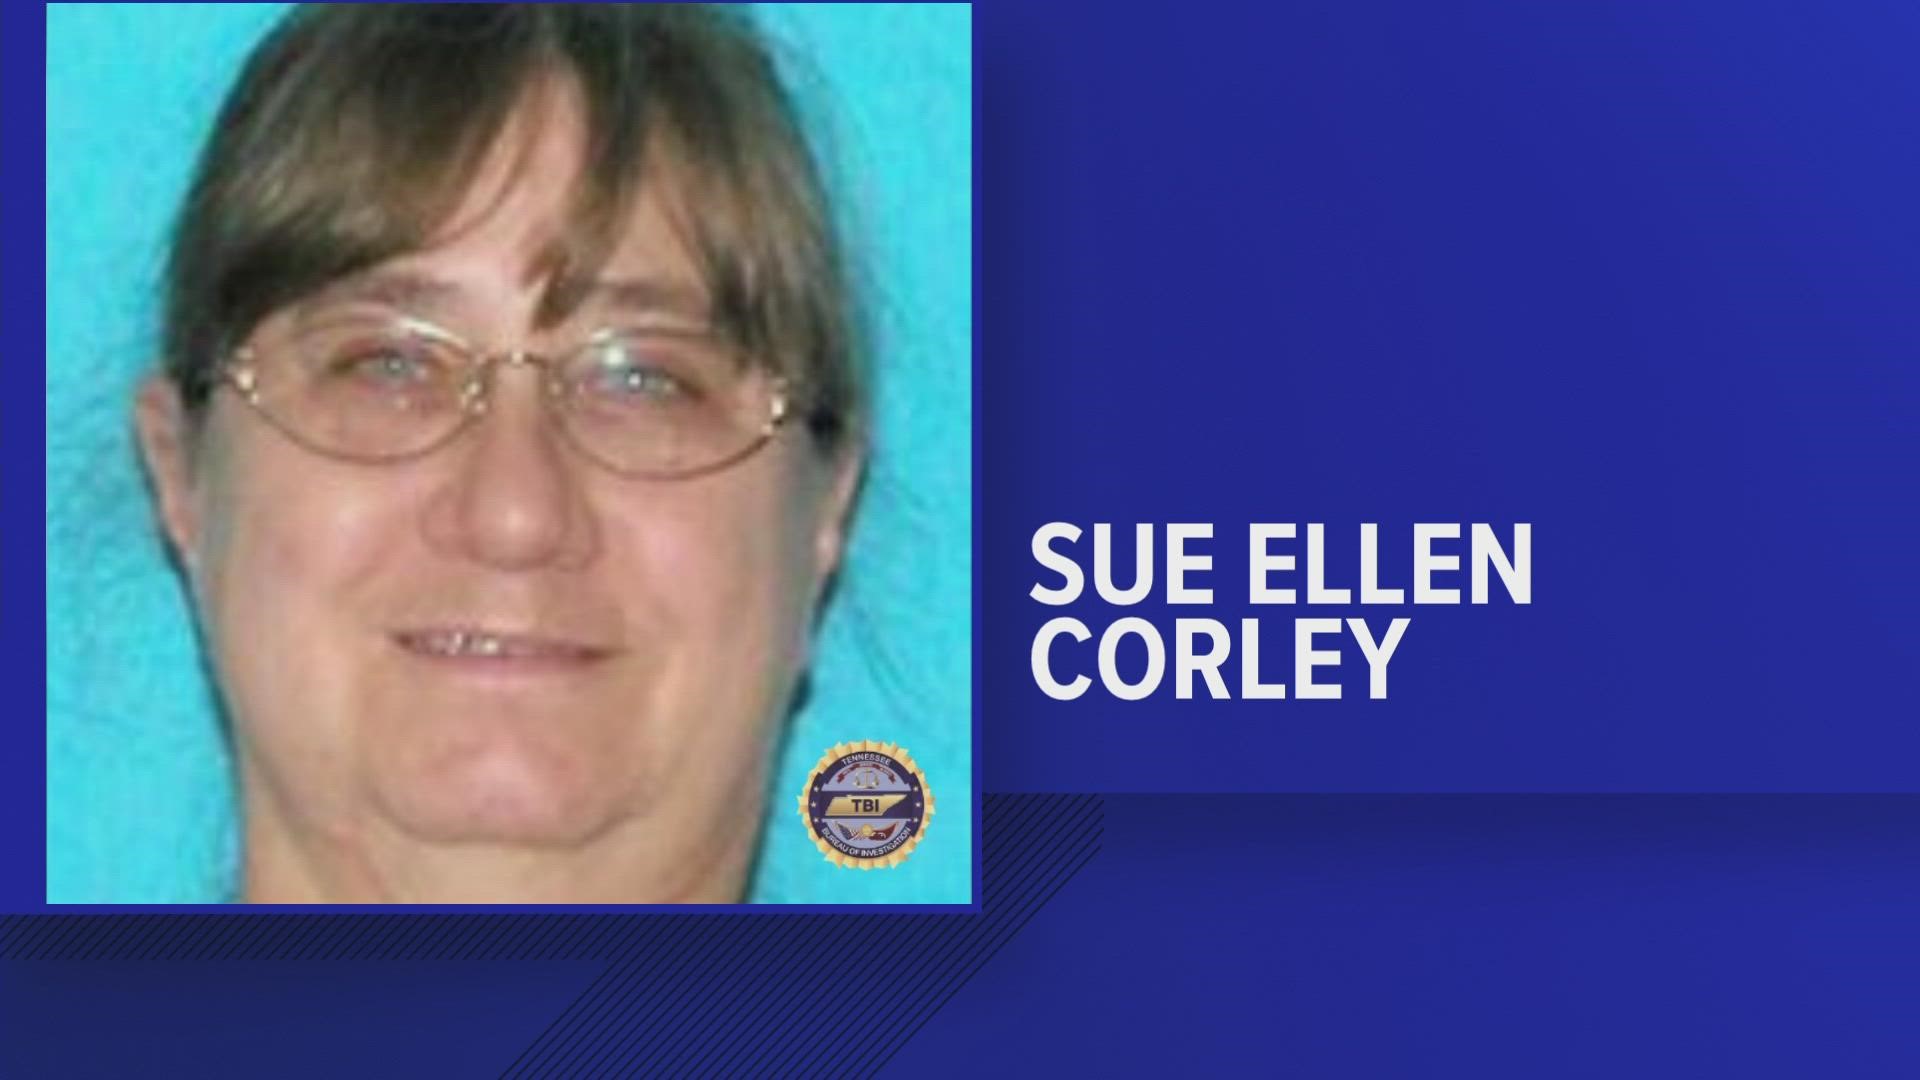 The Tennessee Bureau of Investigation said Sue Ellen Corley, 71, has a medical condition that could impair her ability to return safely without help.